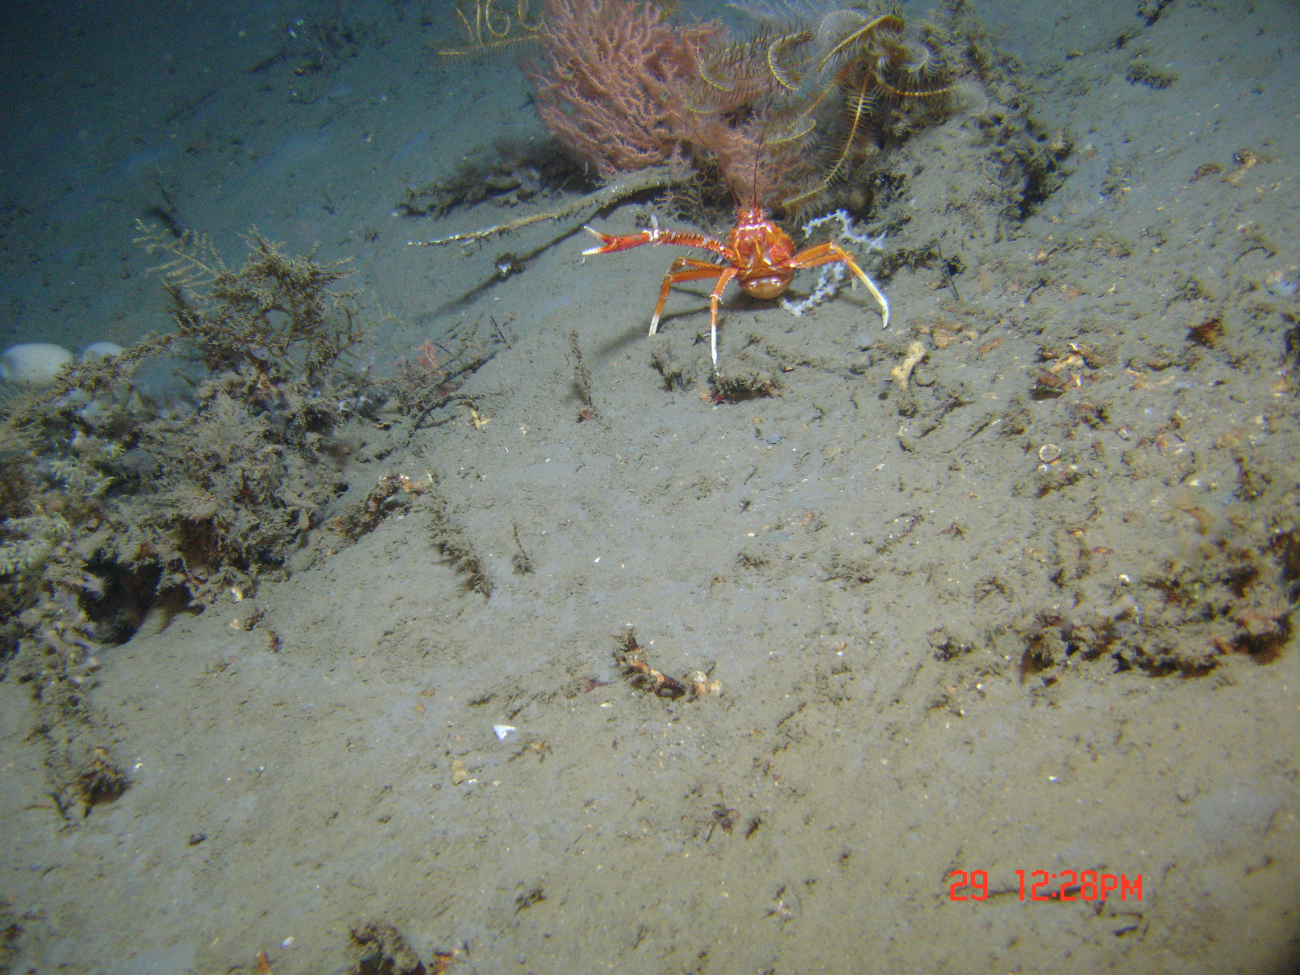 A large squat lobster with only one chela